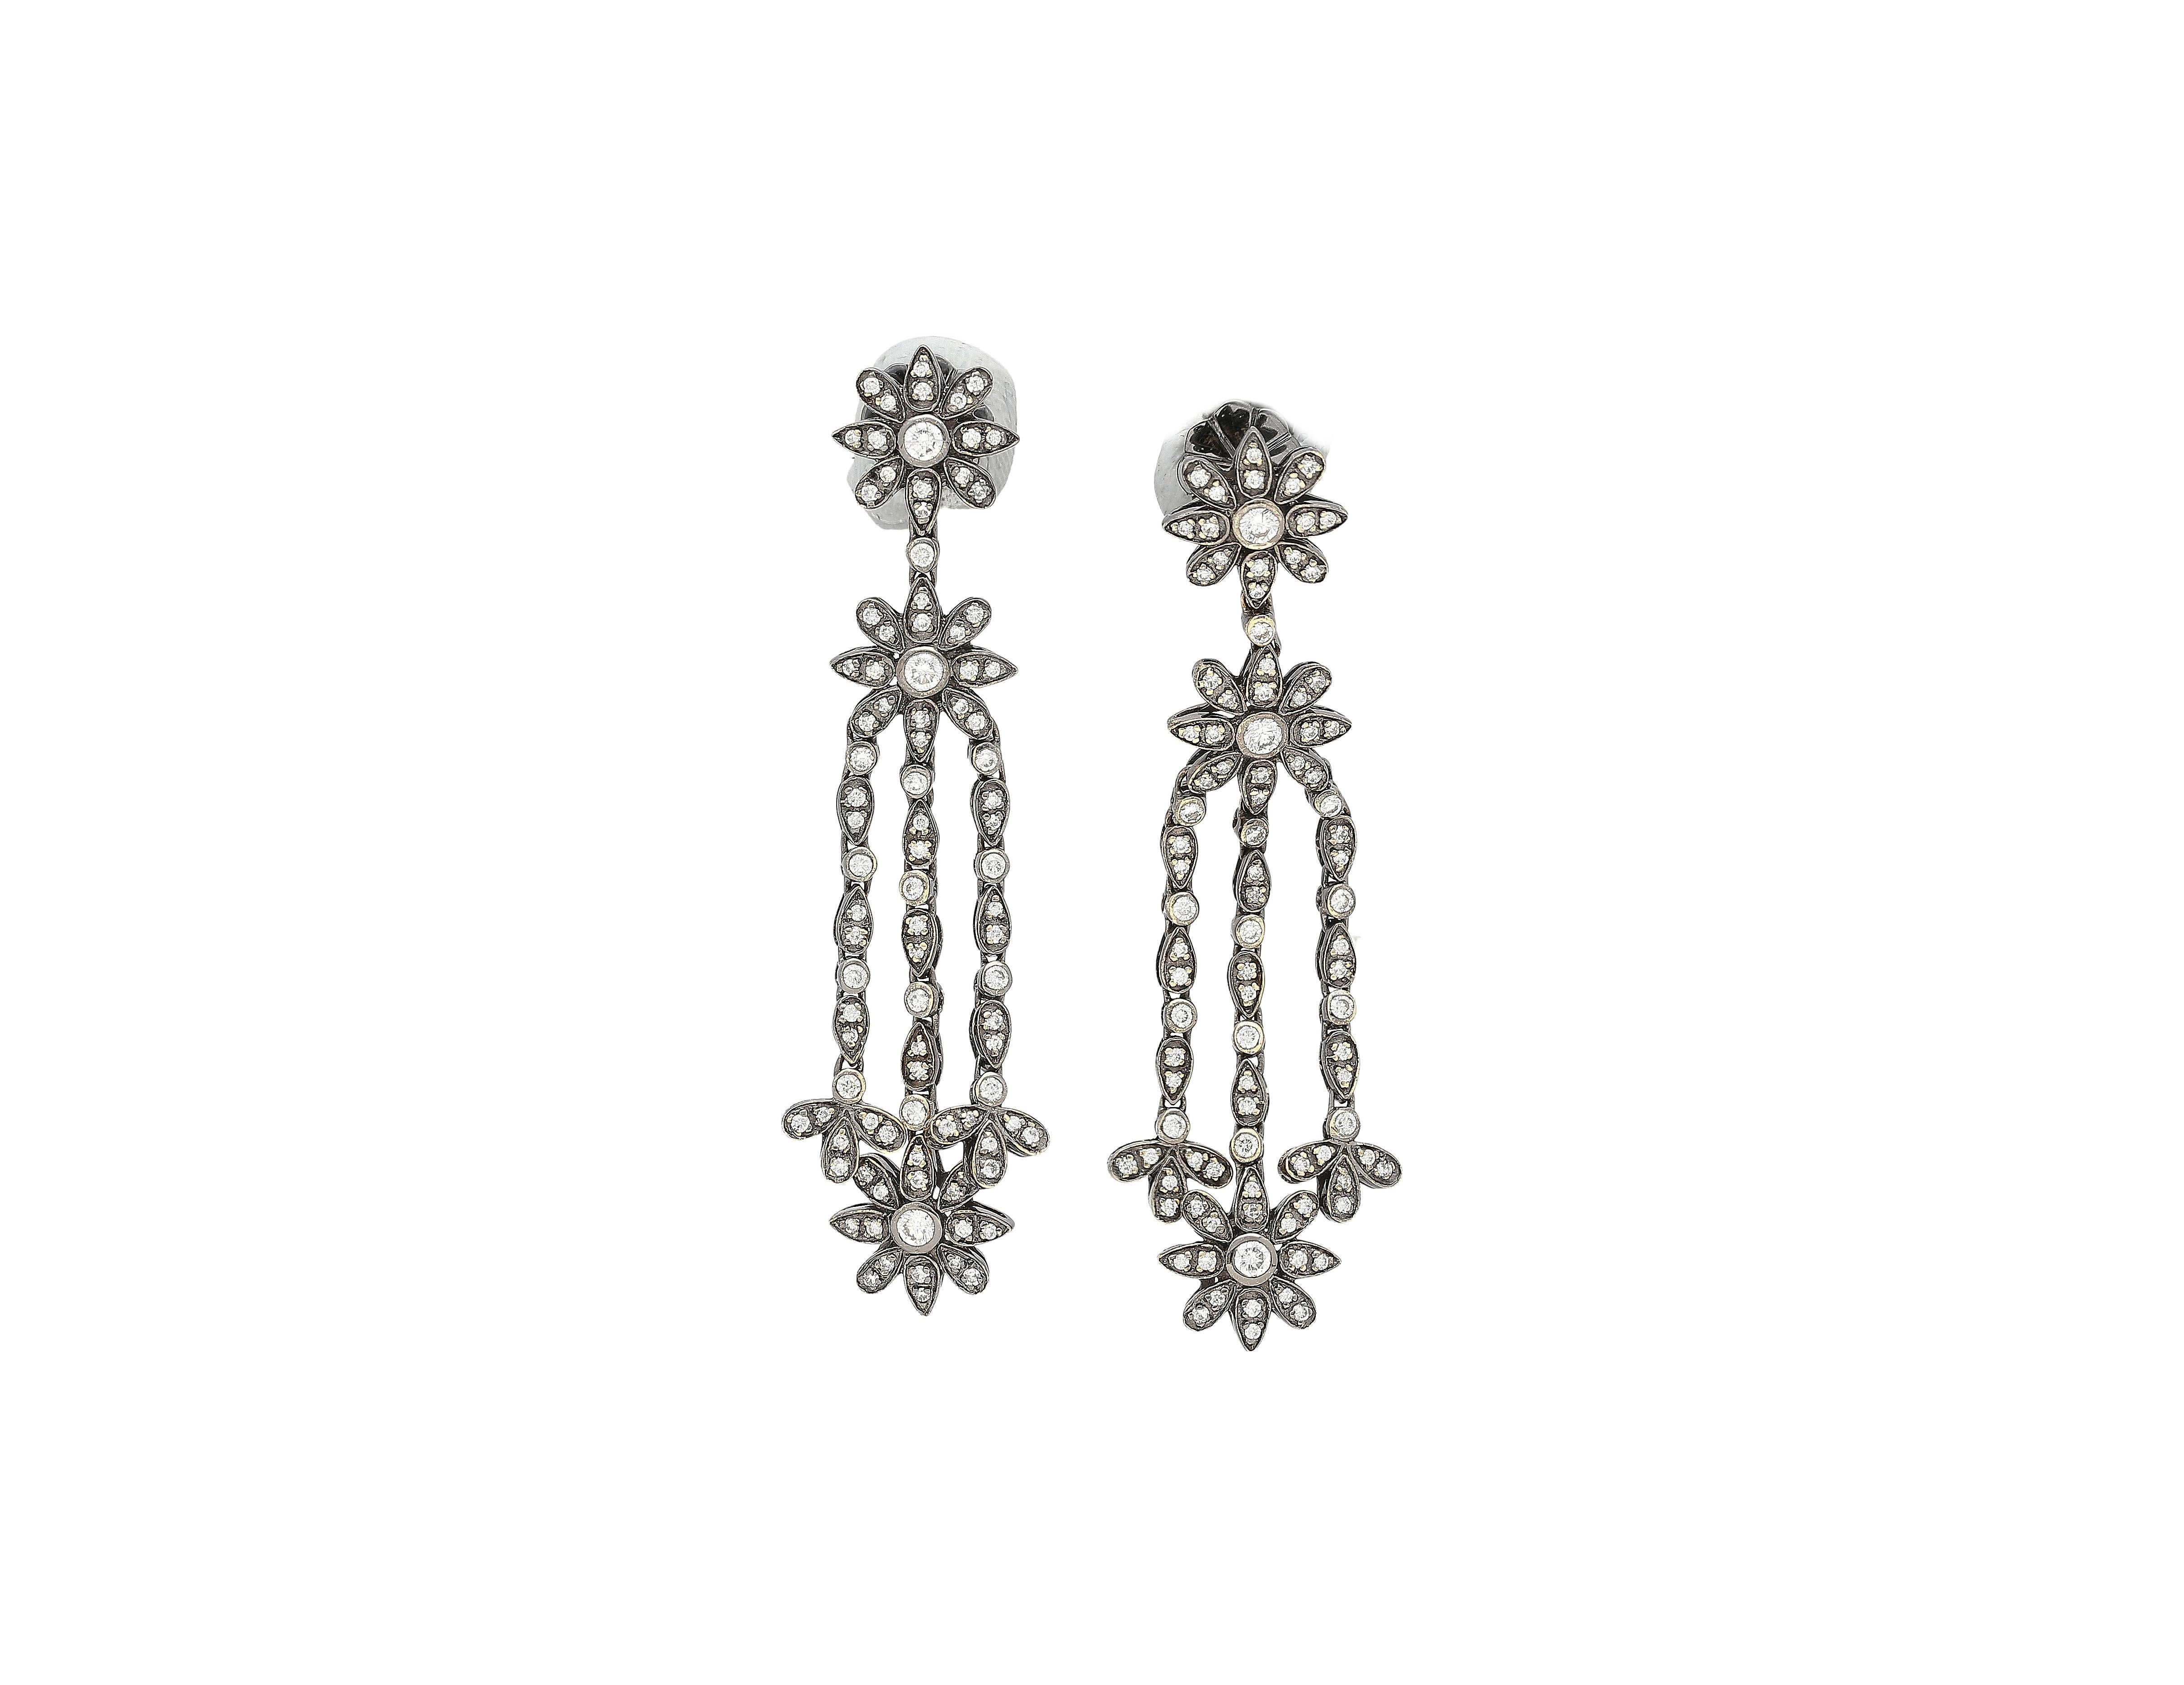 Natural Diamond Dangle Drop Earrings in 18K White & Black Gold.

These earrings feature a floral design made from round-cut diamonds as well as an additional diamond side stone, with a total weight of 5 carats. Each diamond detail is secured using a